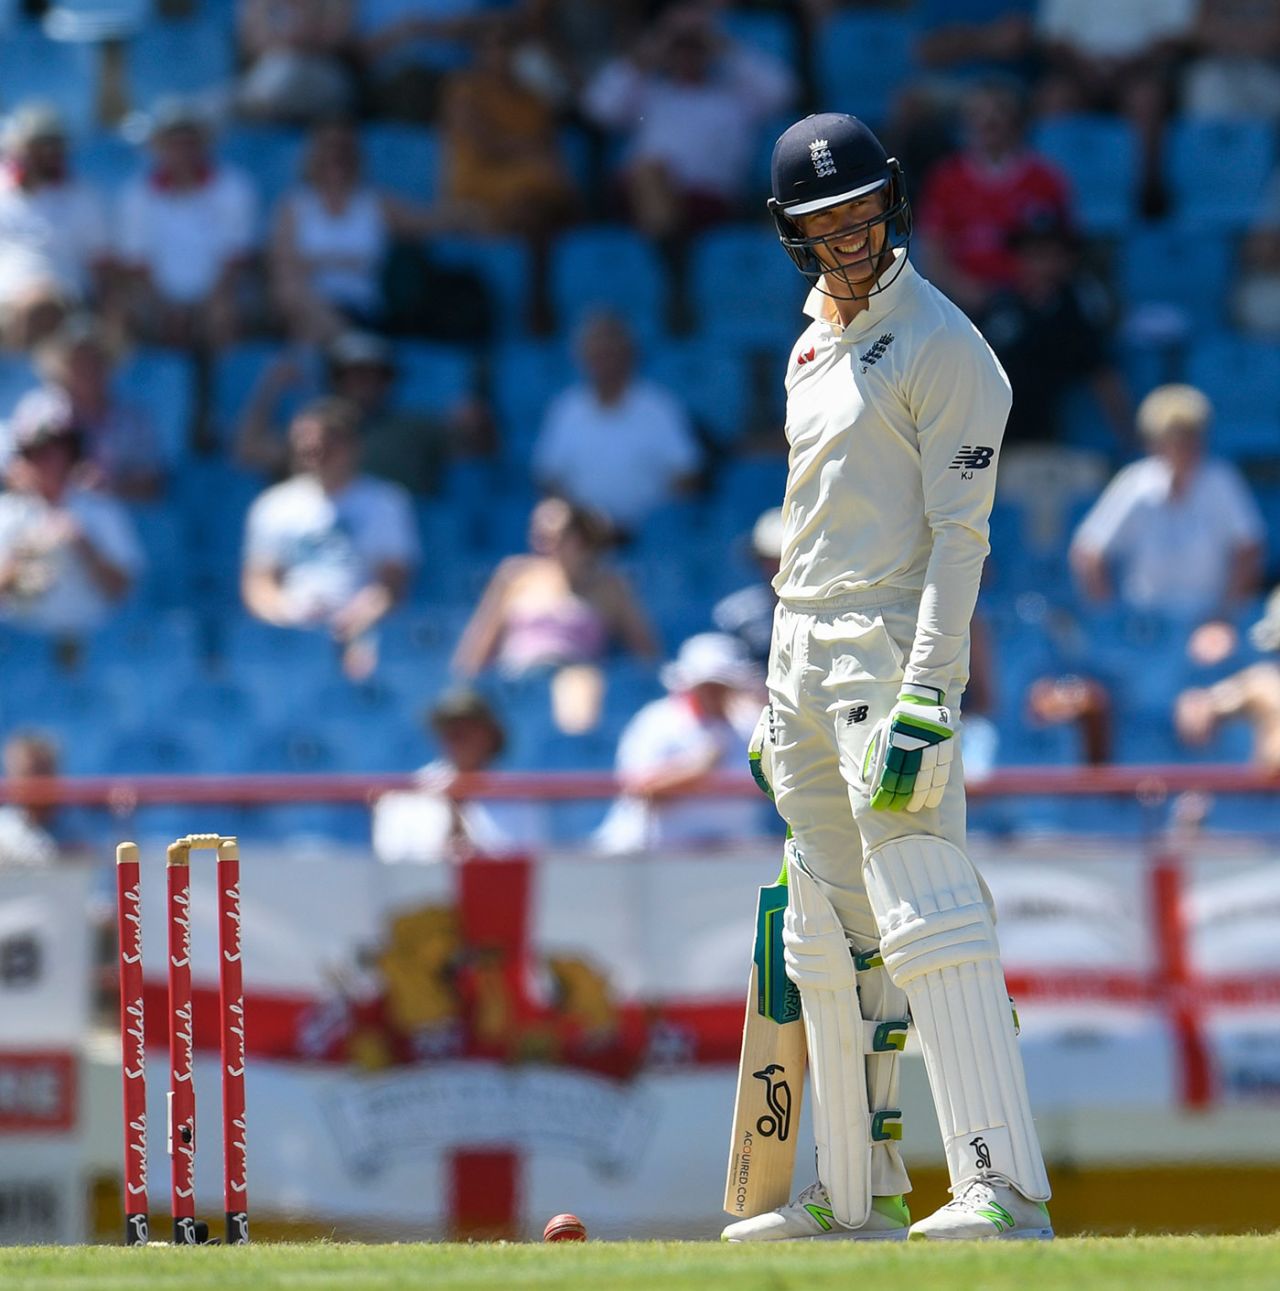 Keaton Jennings smiles ruefully after being bowled off his thigh pad, West Indies v England, 3rd Test, St Lucia, 3rd day, February 11, 2019